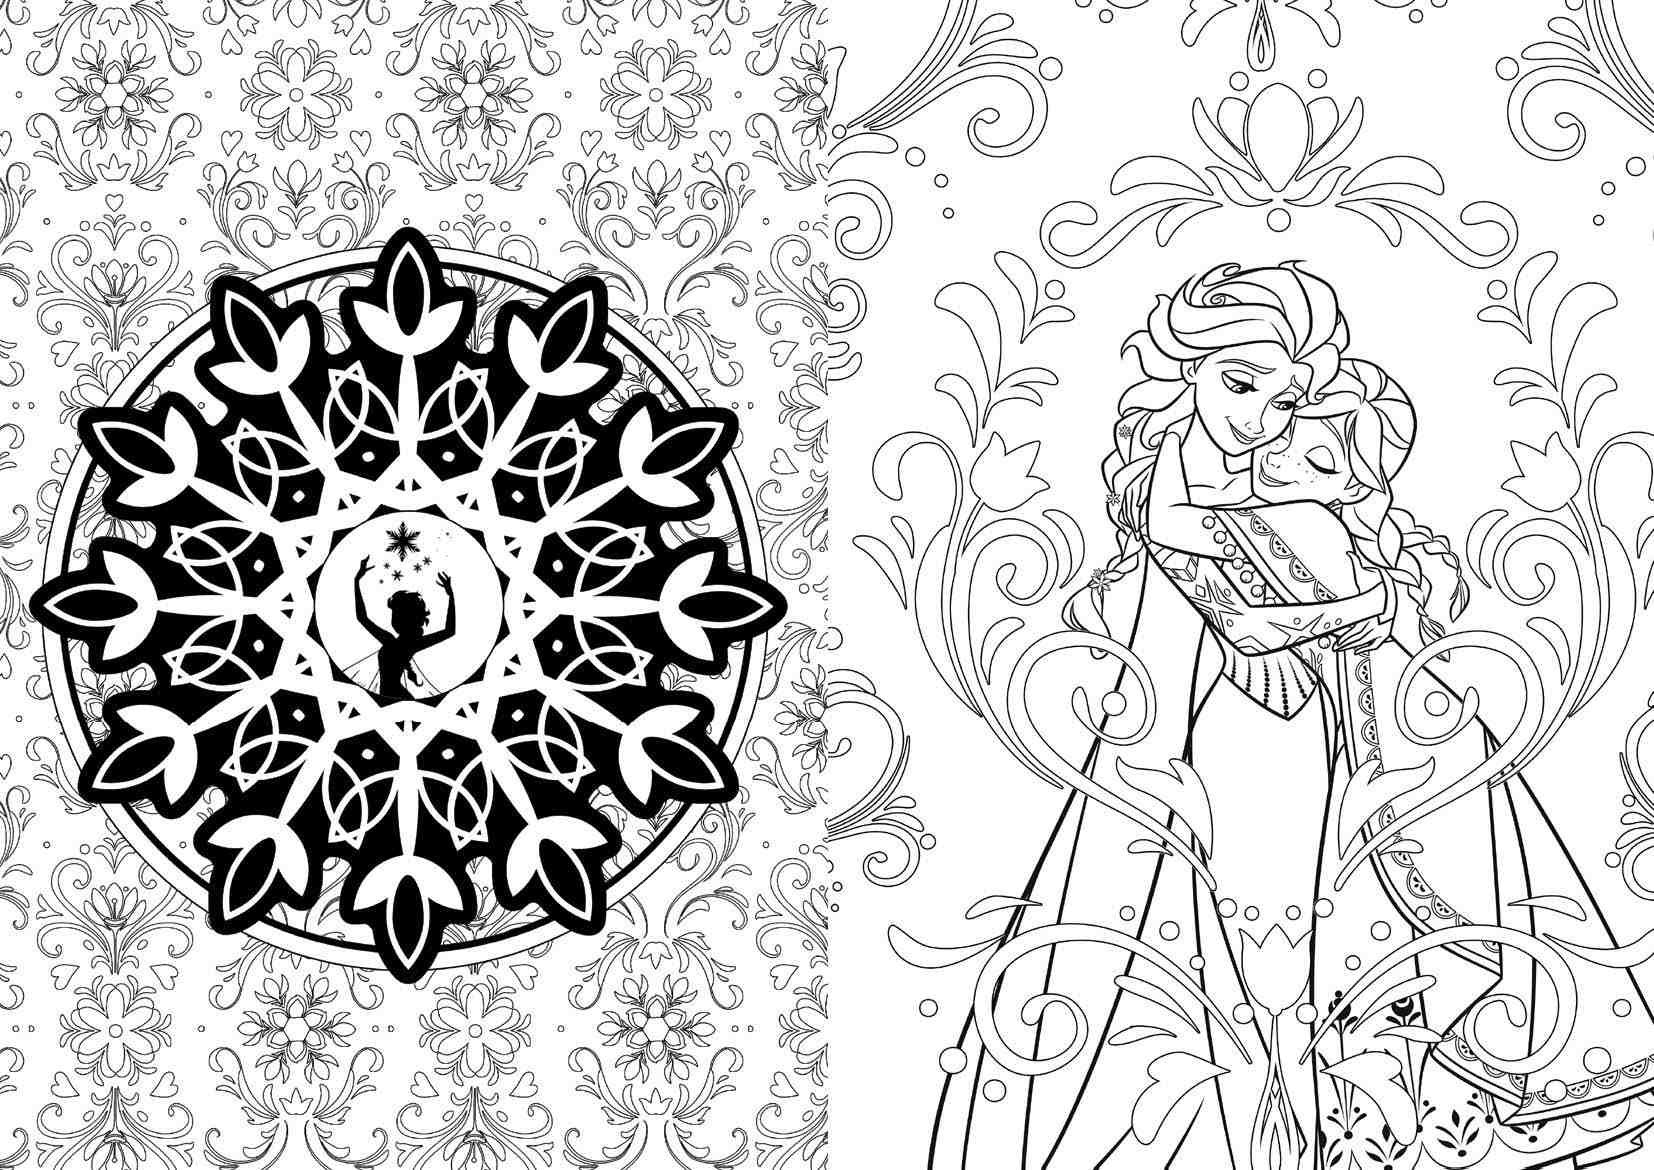 Download Disney Offers Coloring Books for Adults